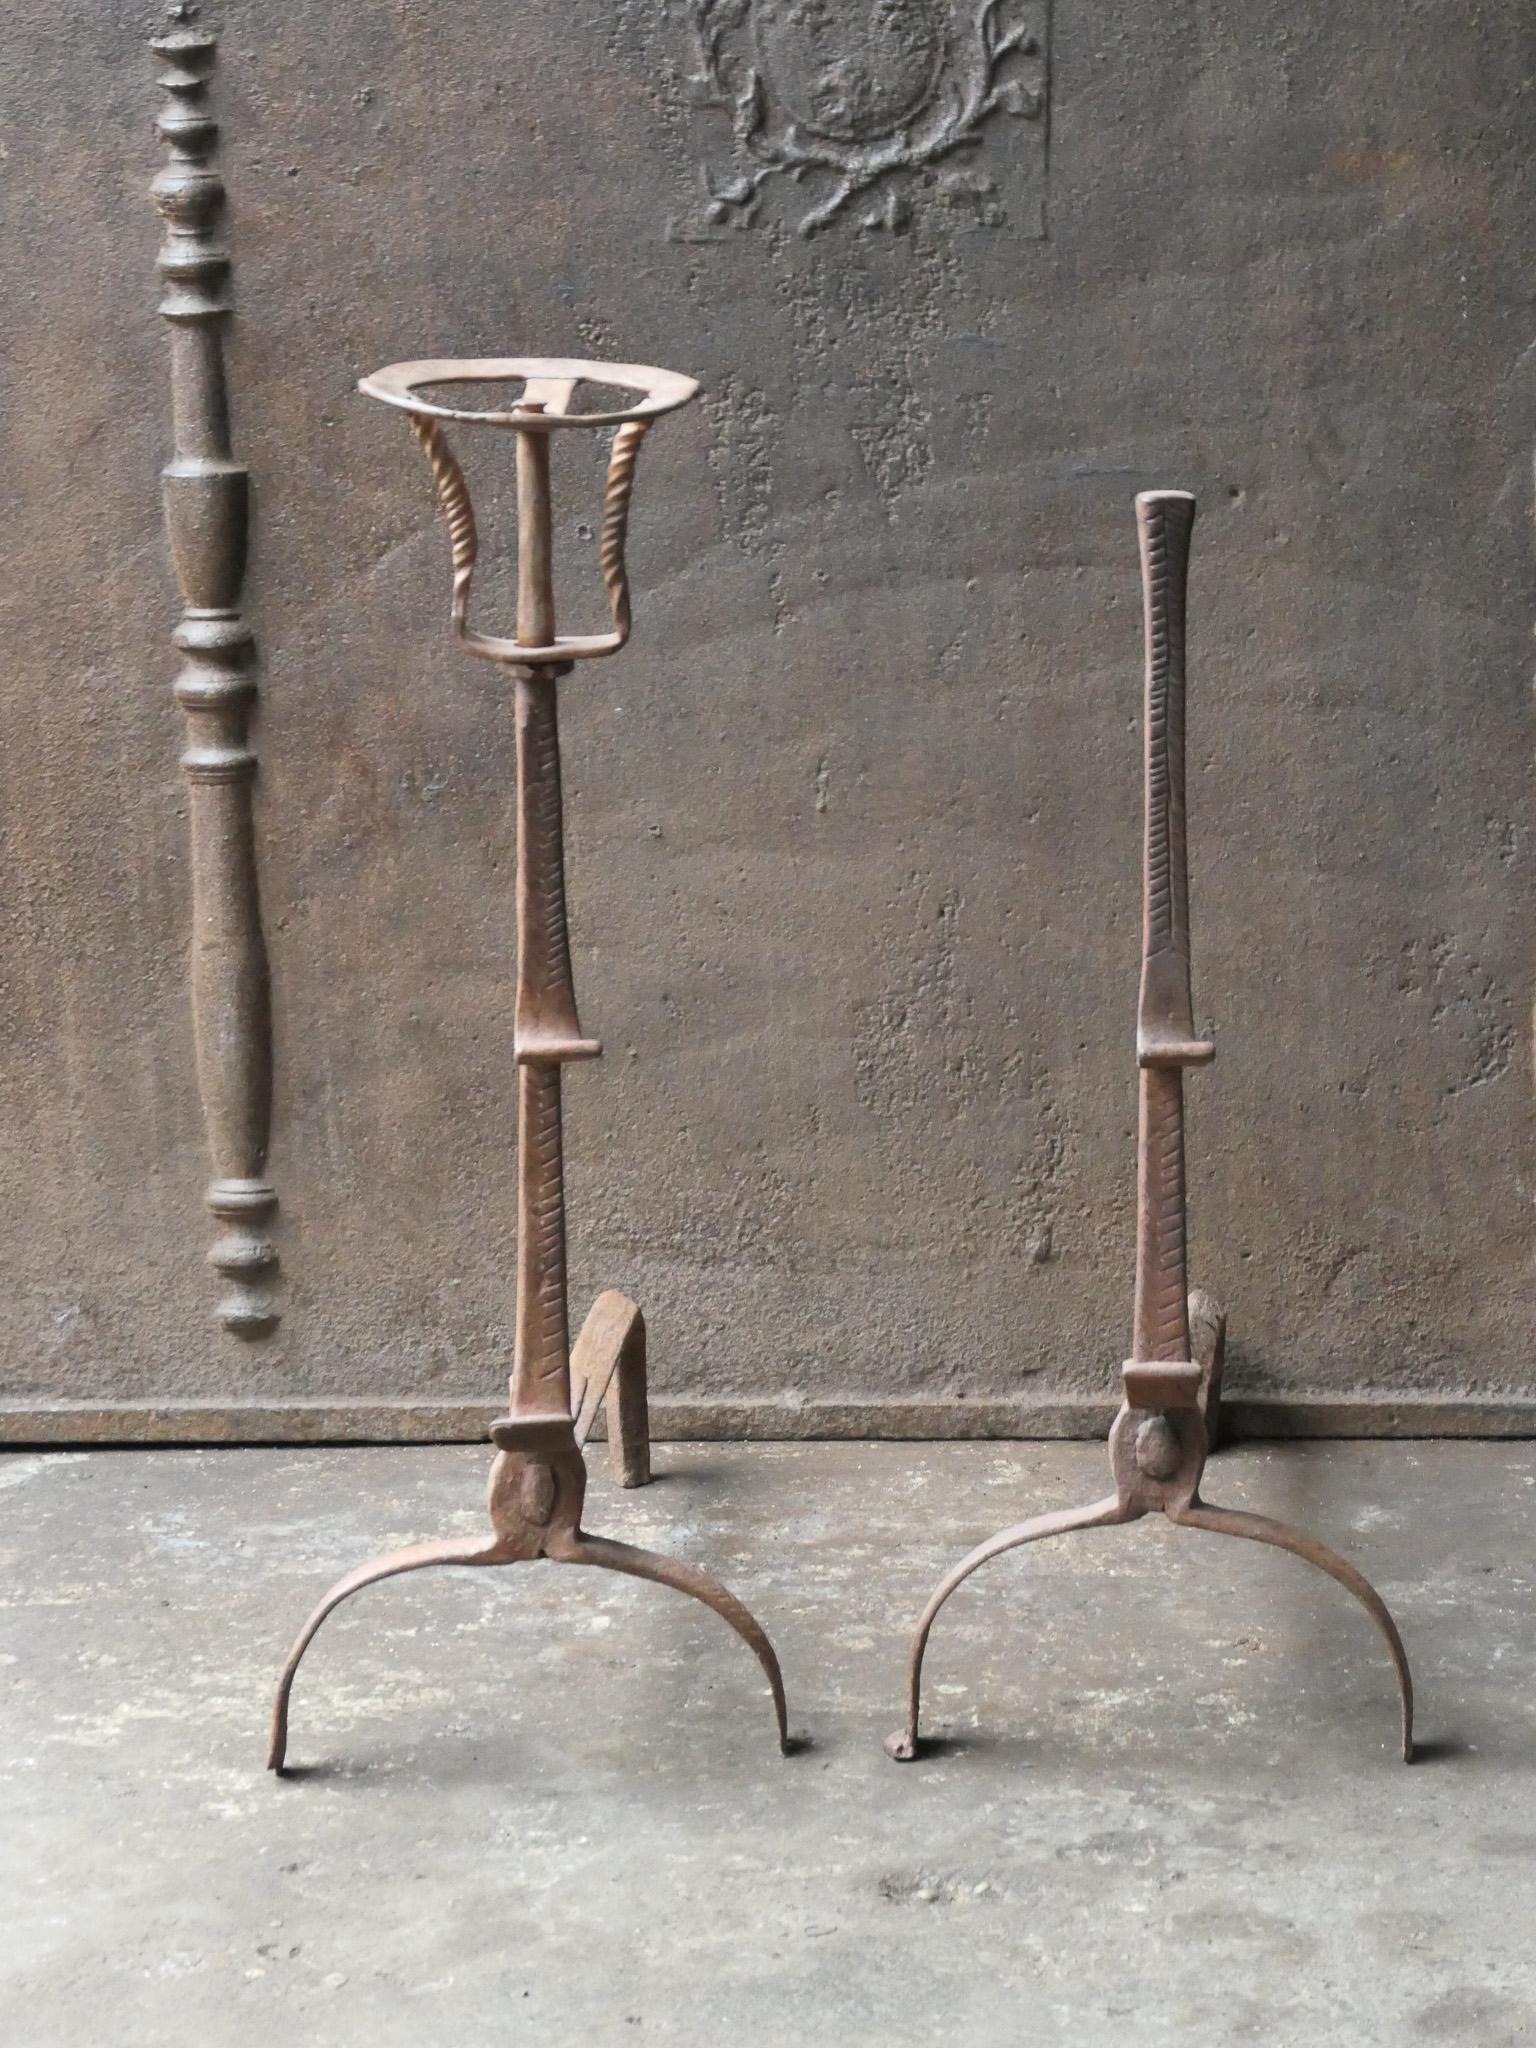 17th century French Louis XIII period fire dogs with spit hooks. Made of wrought iron. These French andirons are called 'landiers' in France. This dates from the times the andirons were the main cooking equipment in the house. They had spit hooks to